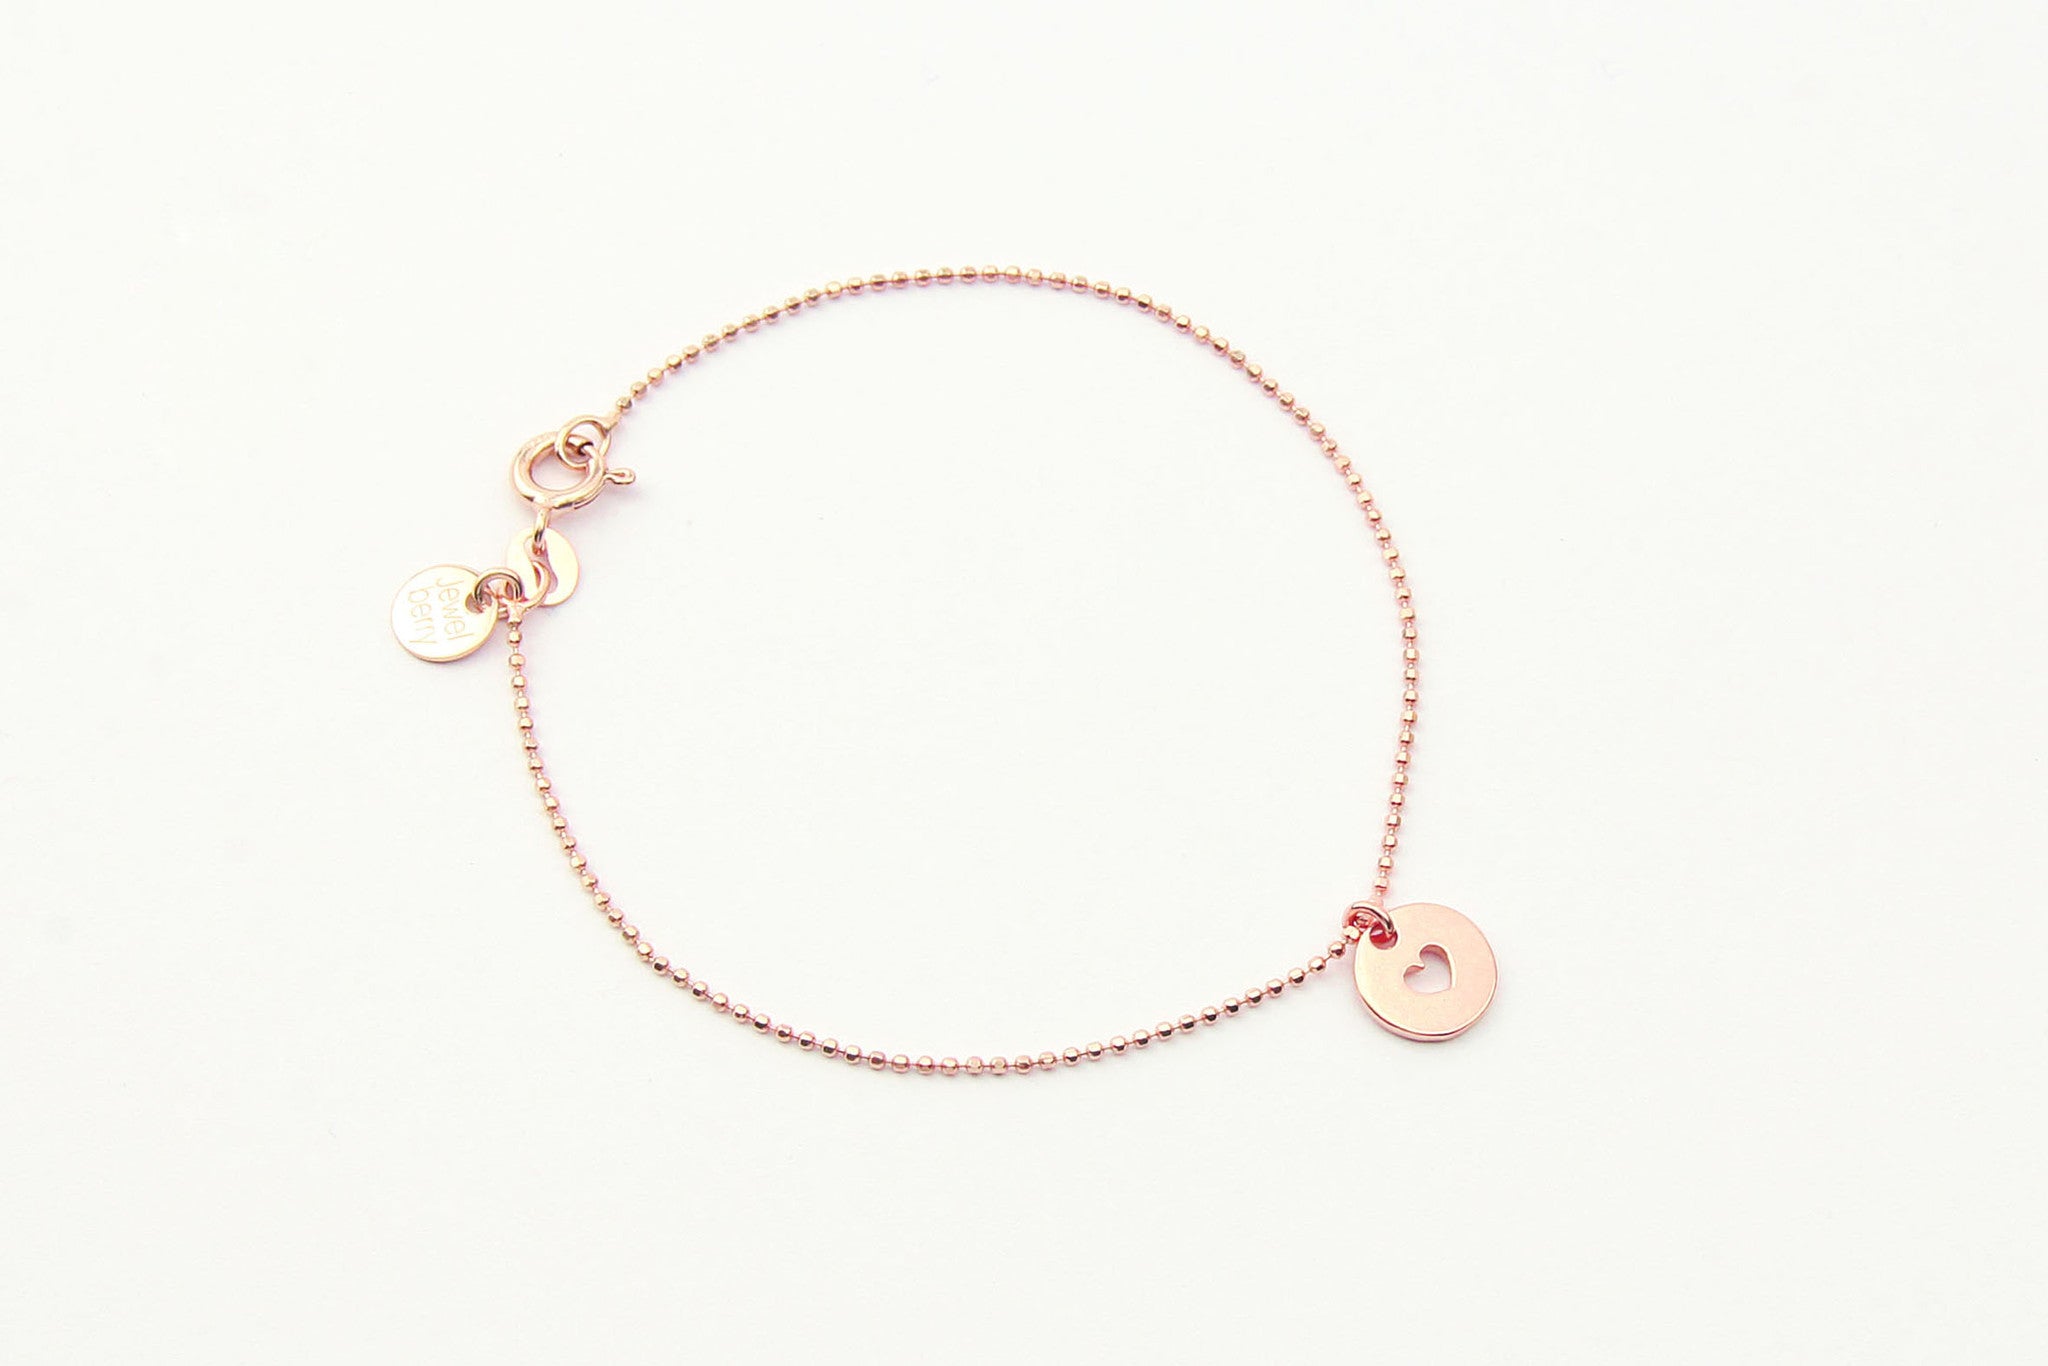 jewelberry armband bracelet love token rose gold plated sterling silver fine jewelry handmade with love fairtrade bead chain